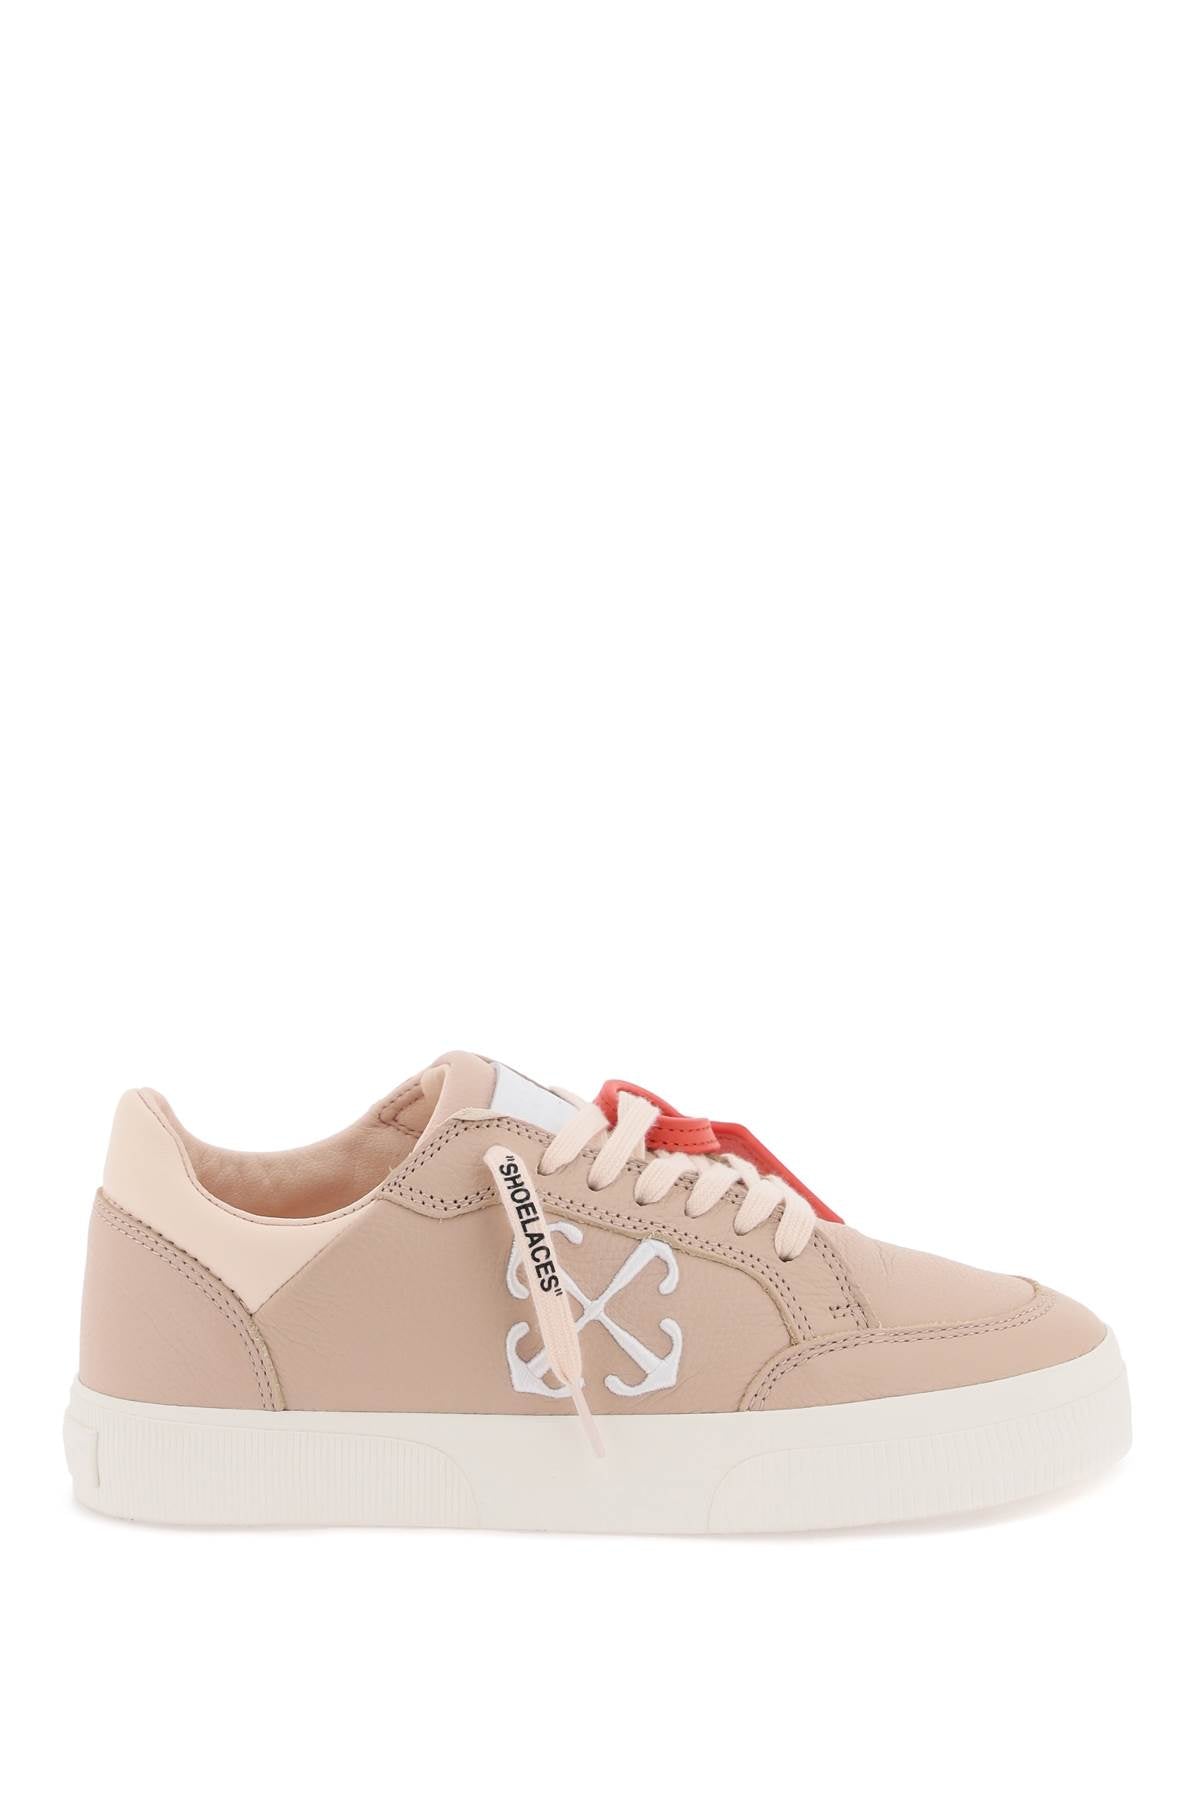 Off-white low leather vulcanized sneakers for-0